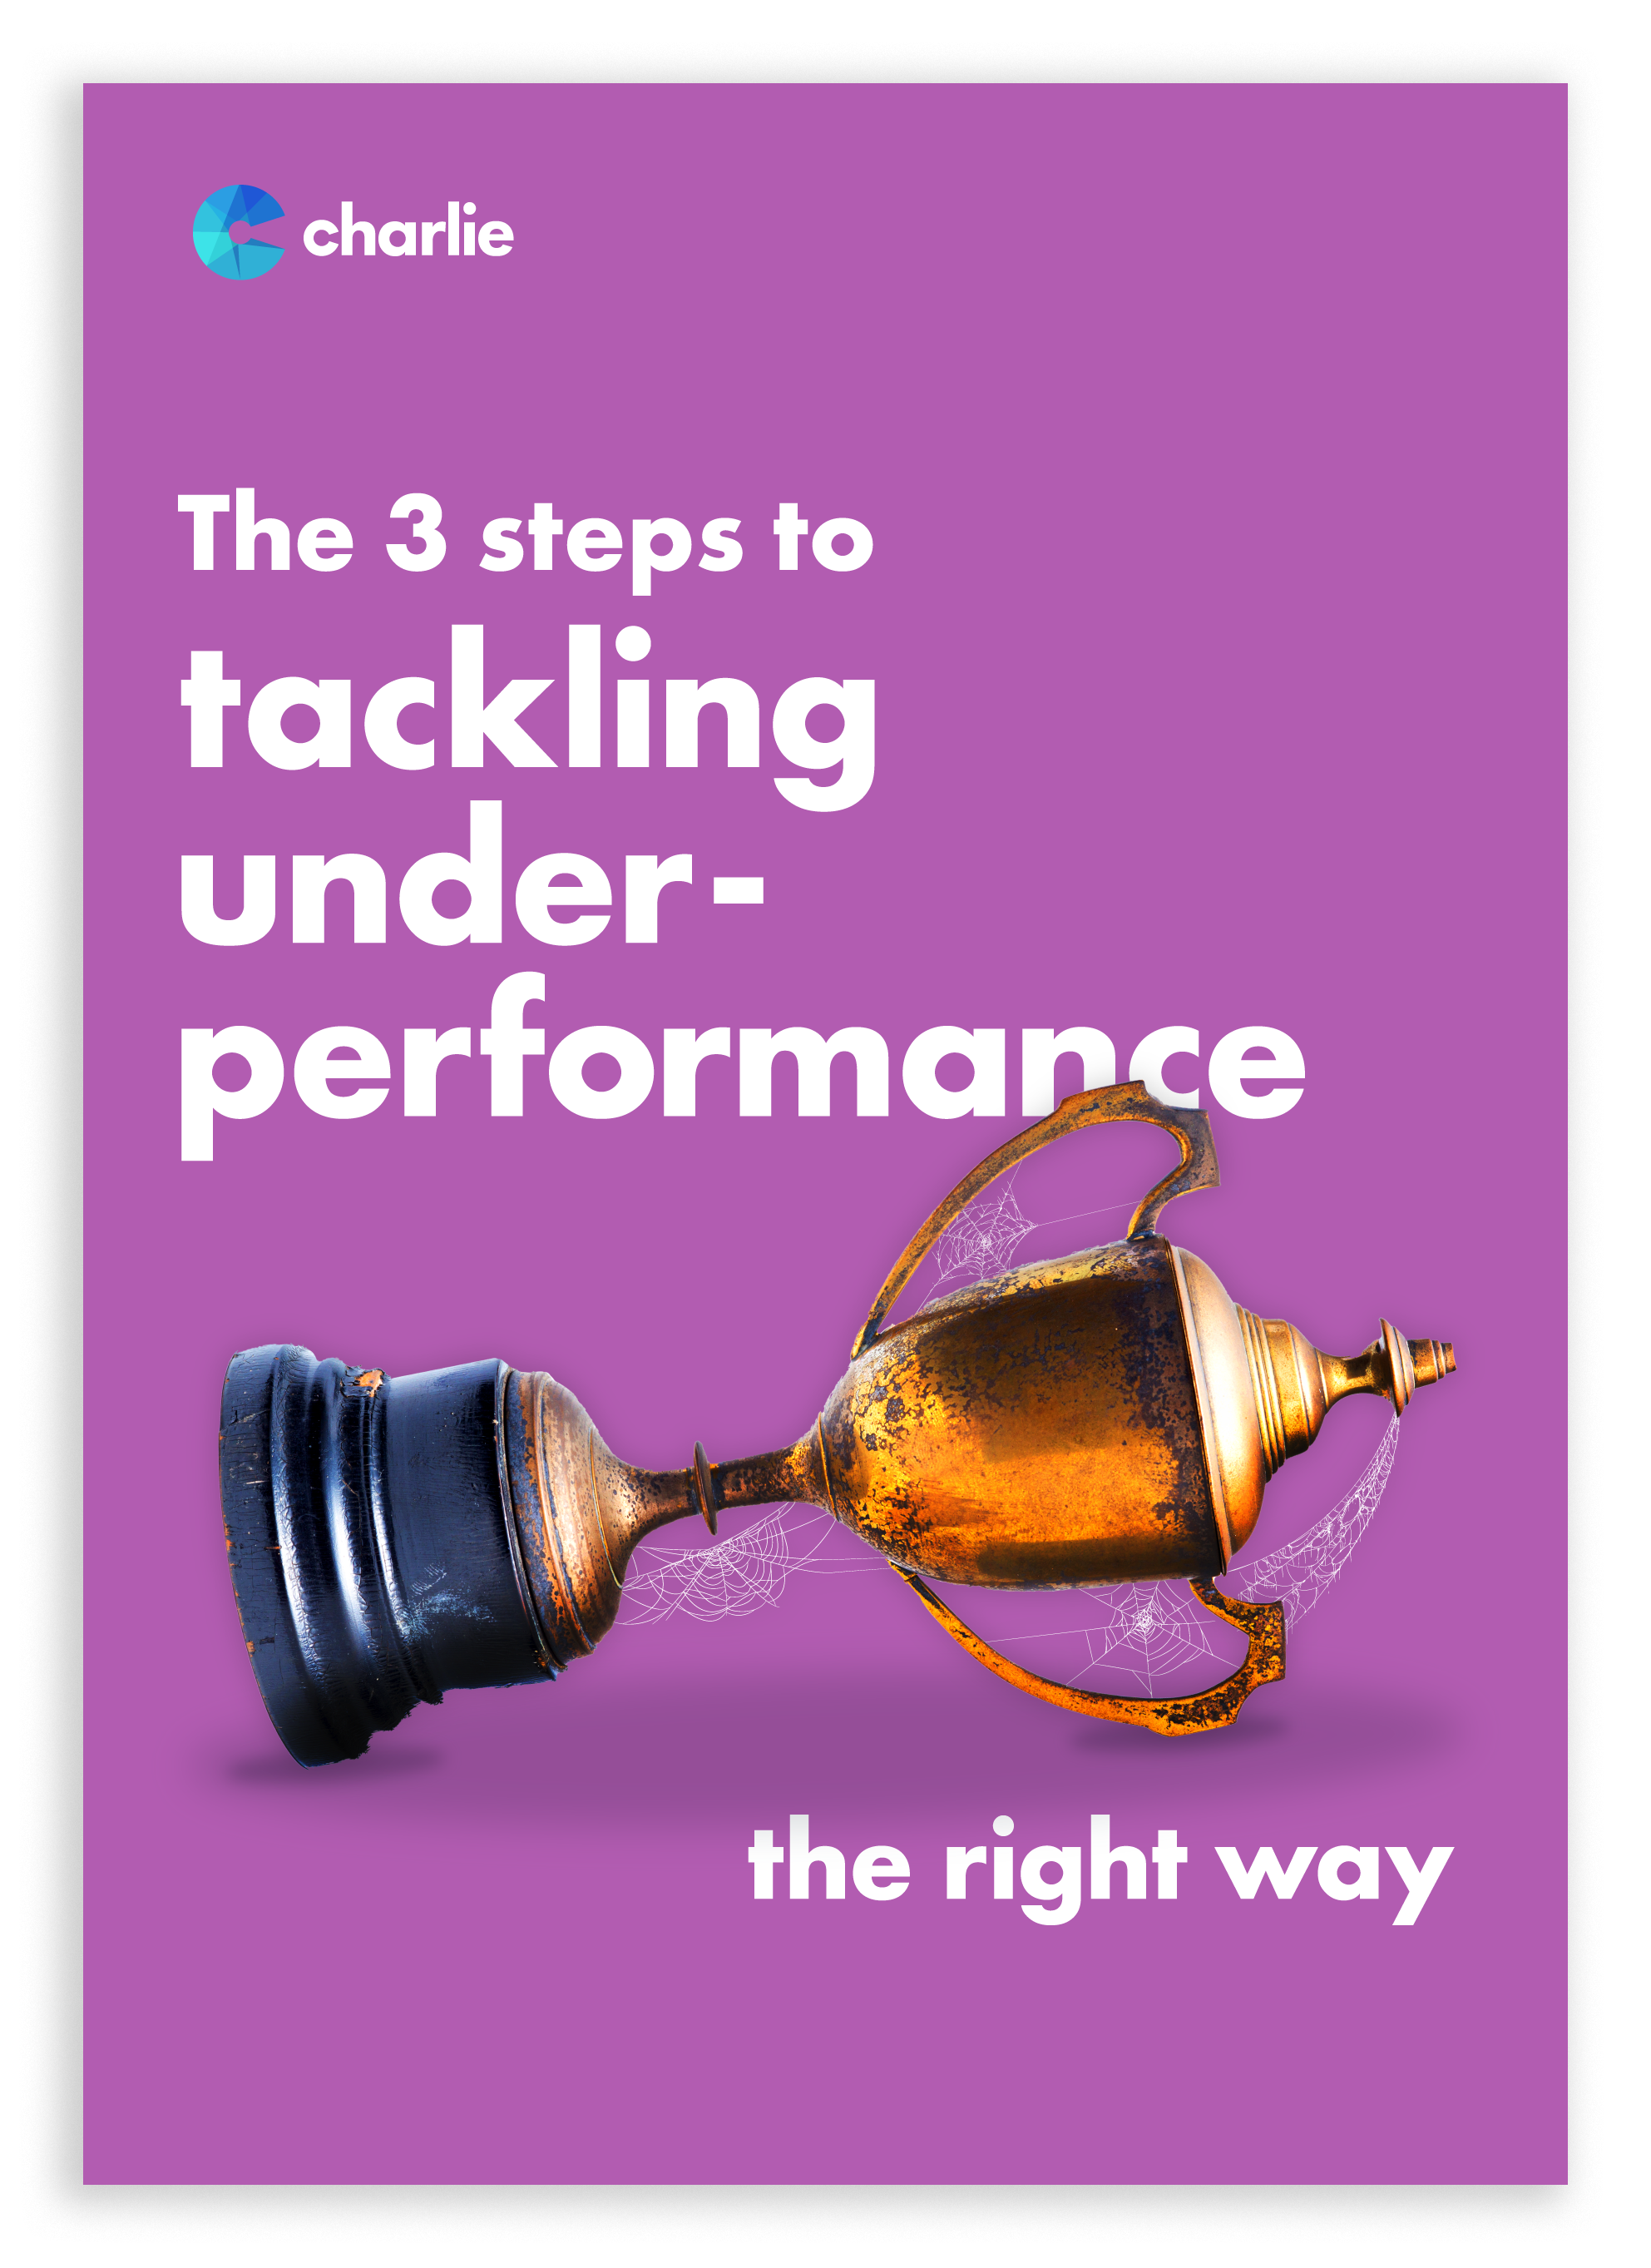 The-3-steps-to-tackling-underperformance-—-the-right-way-COVER-Landing-Page